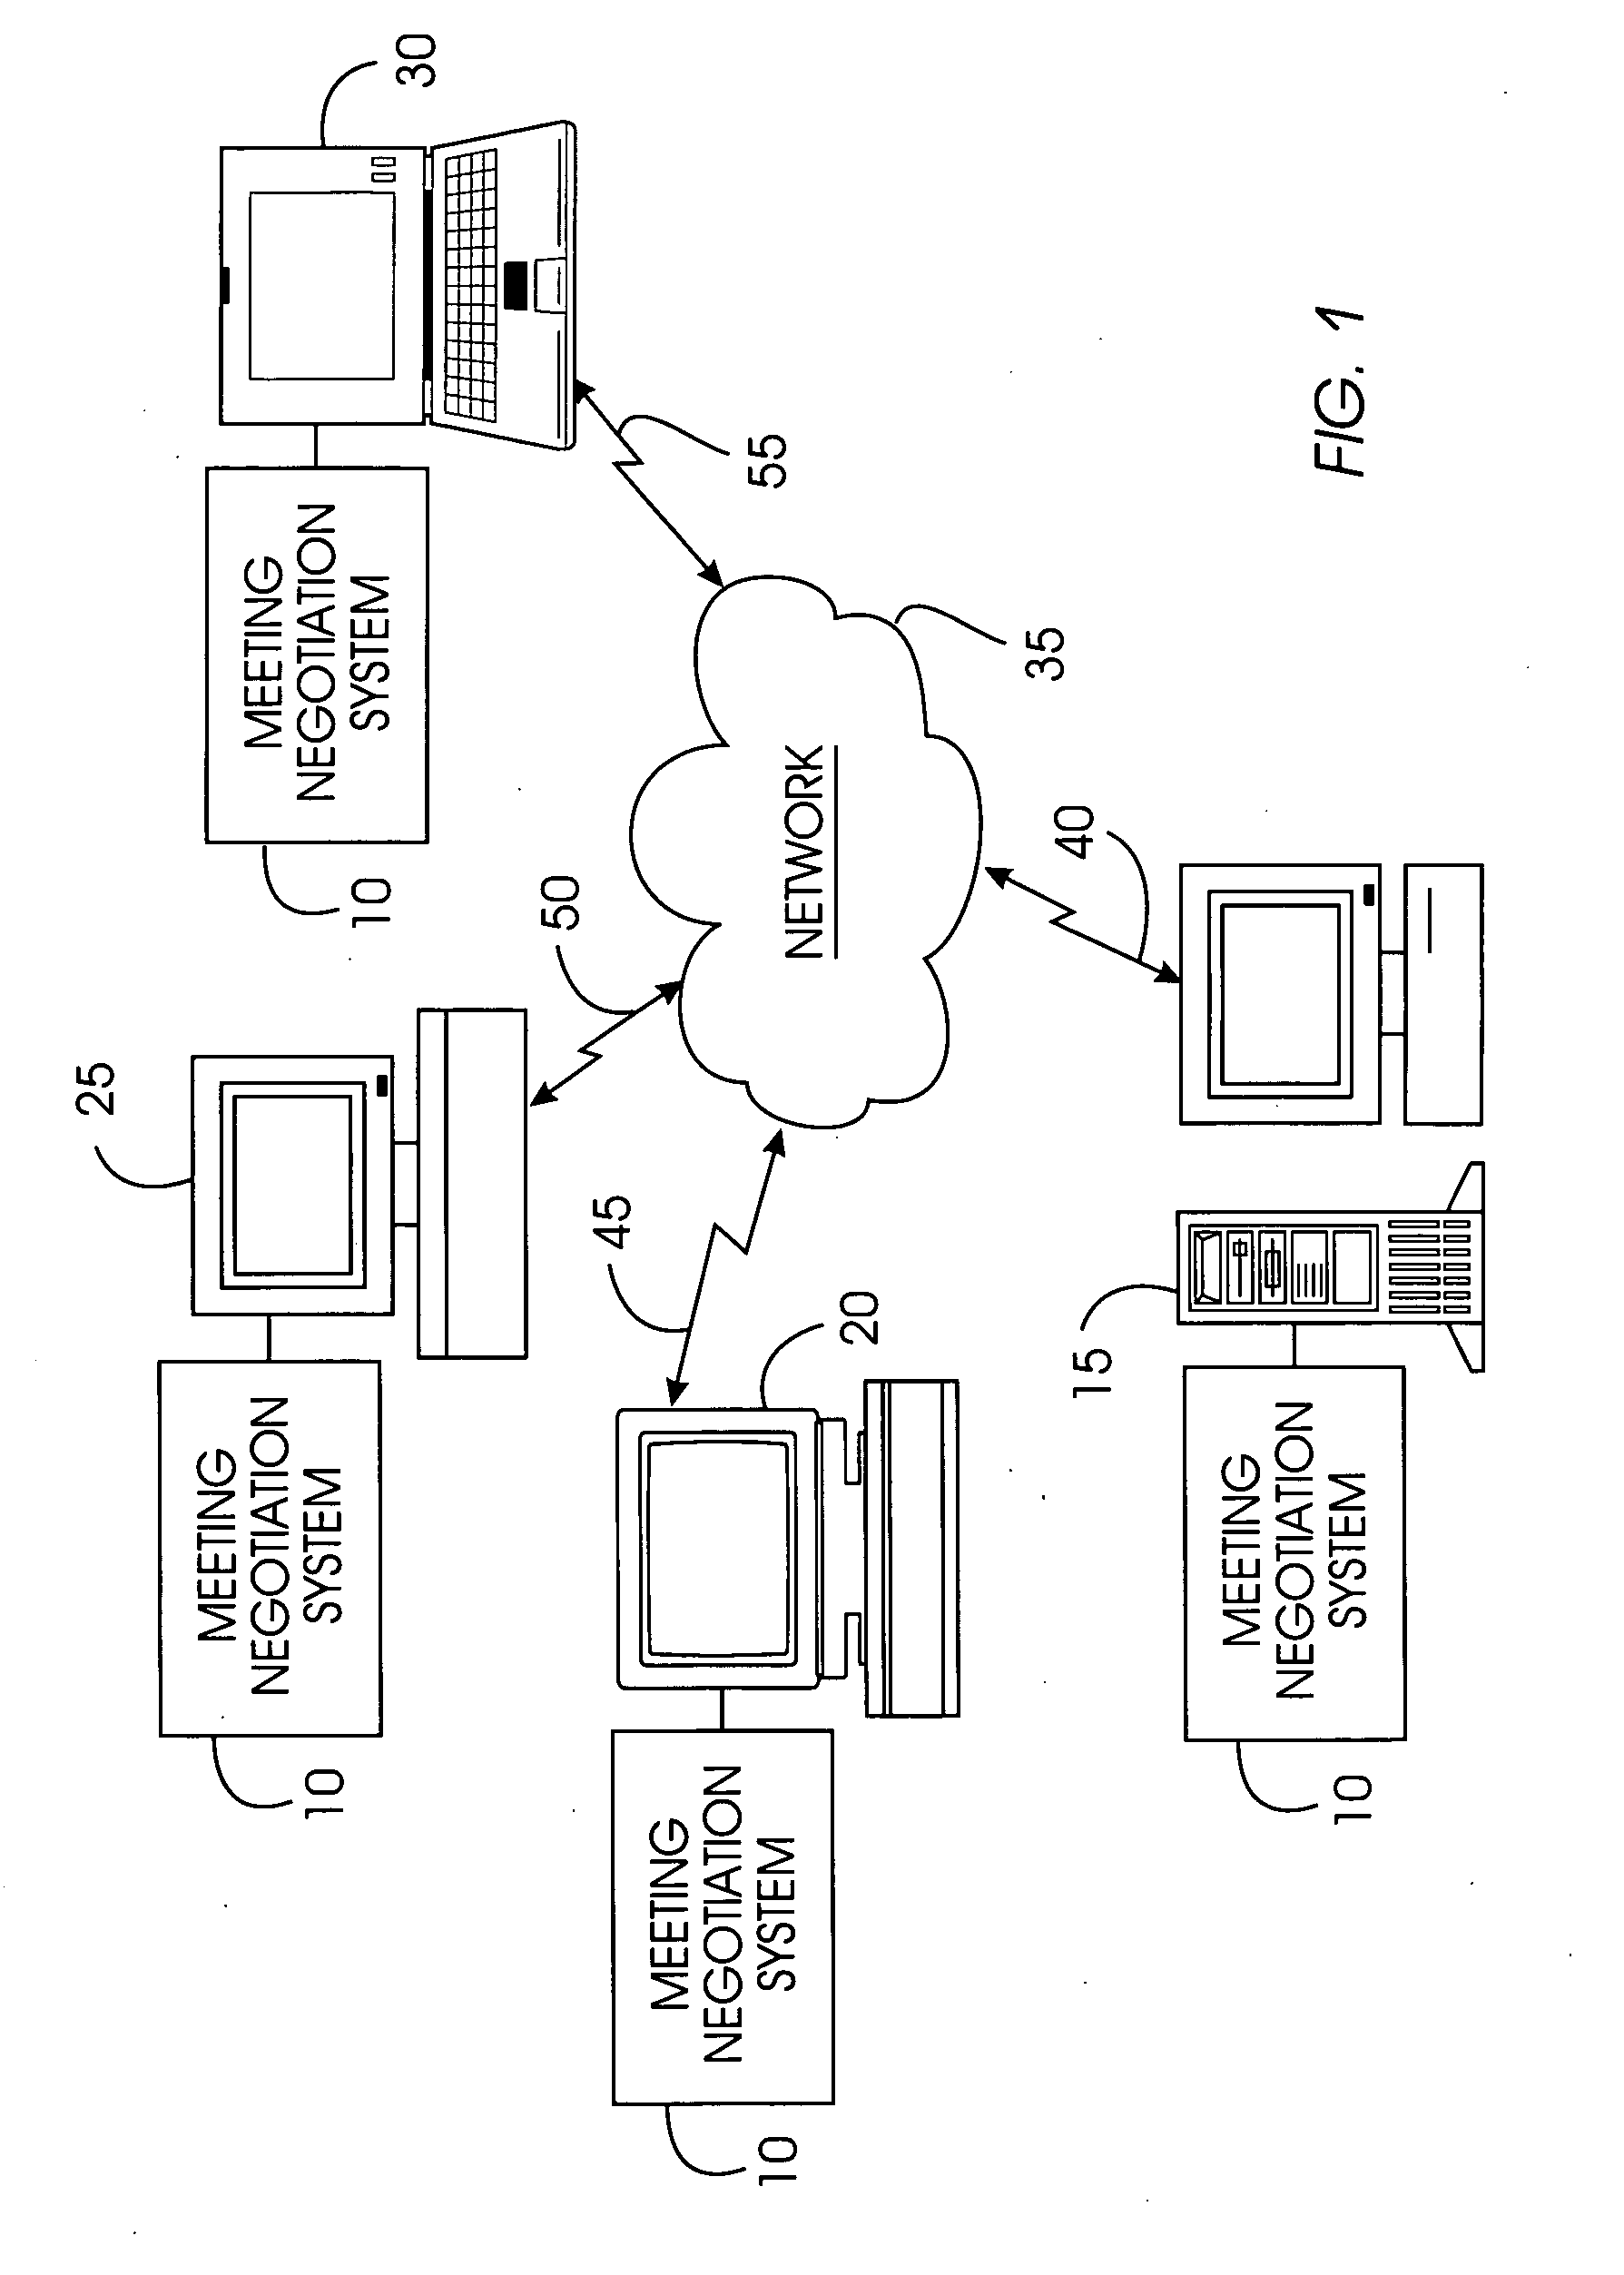 System, method, and service for negotiating schedules while preserving privacy through a shared representation